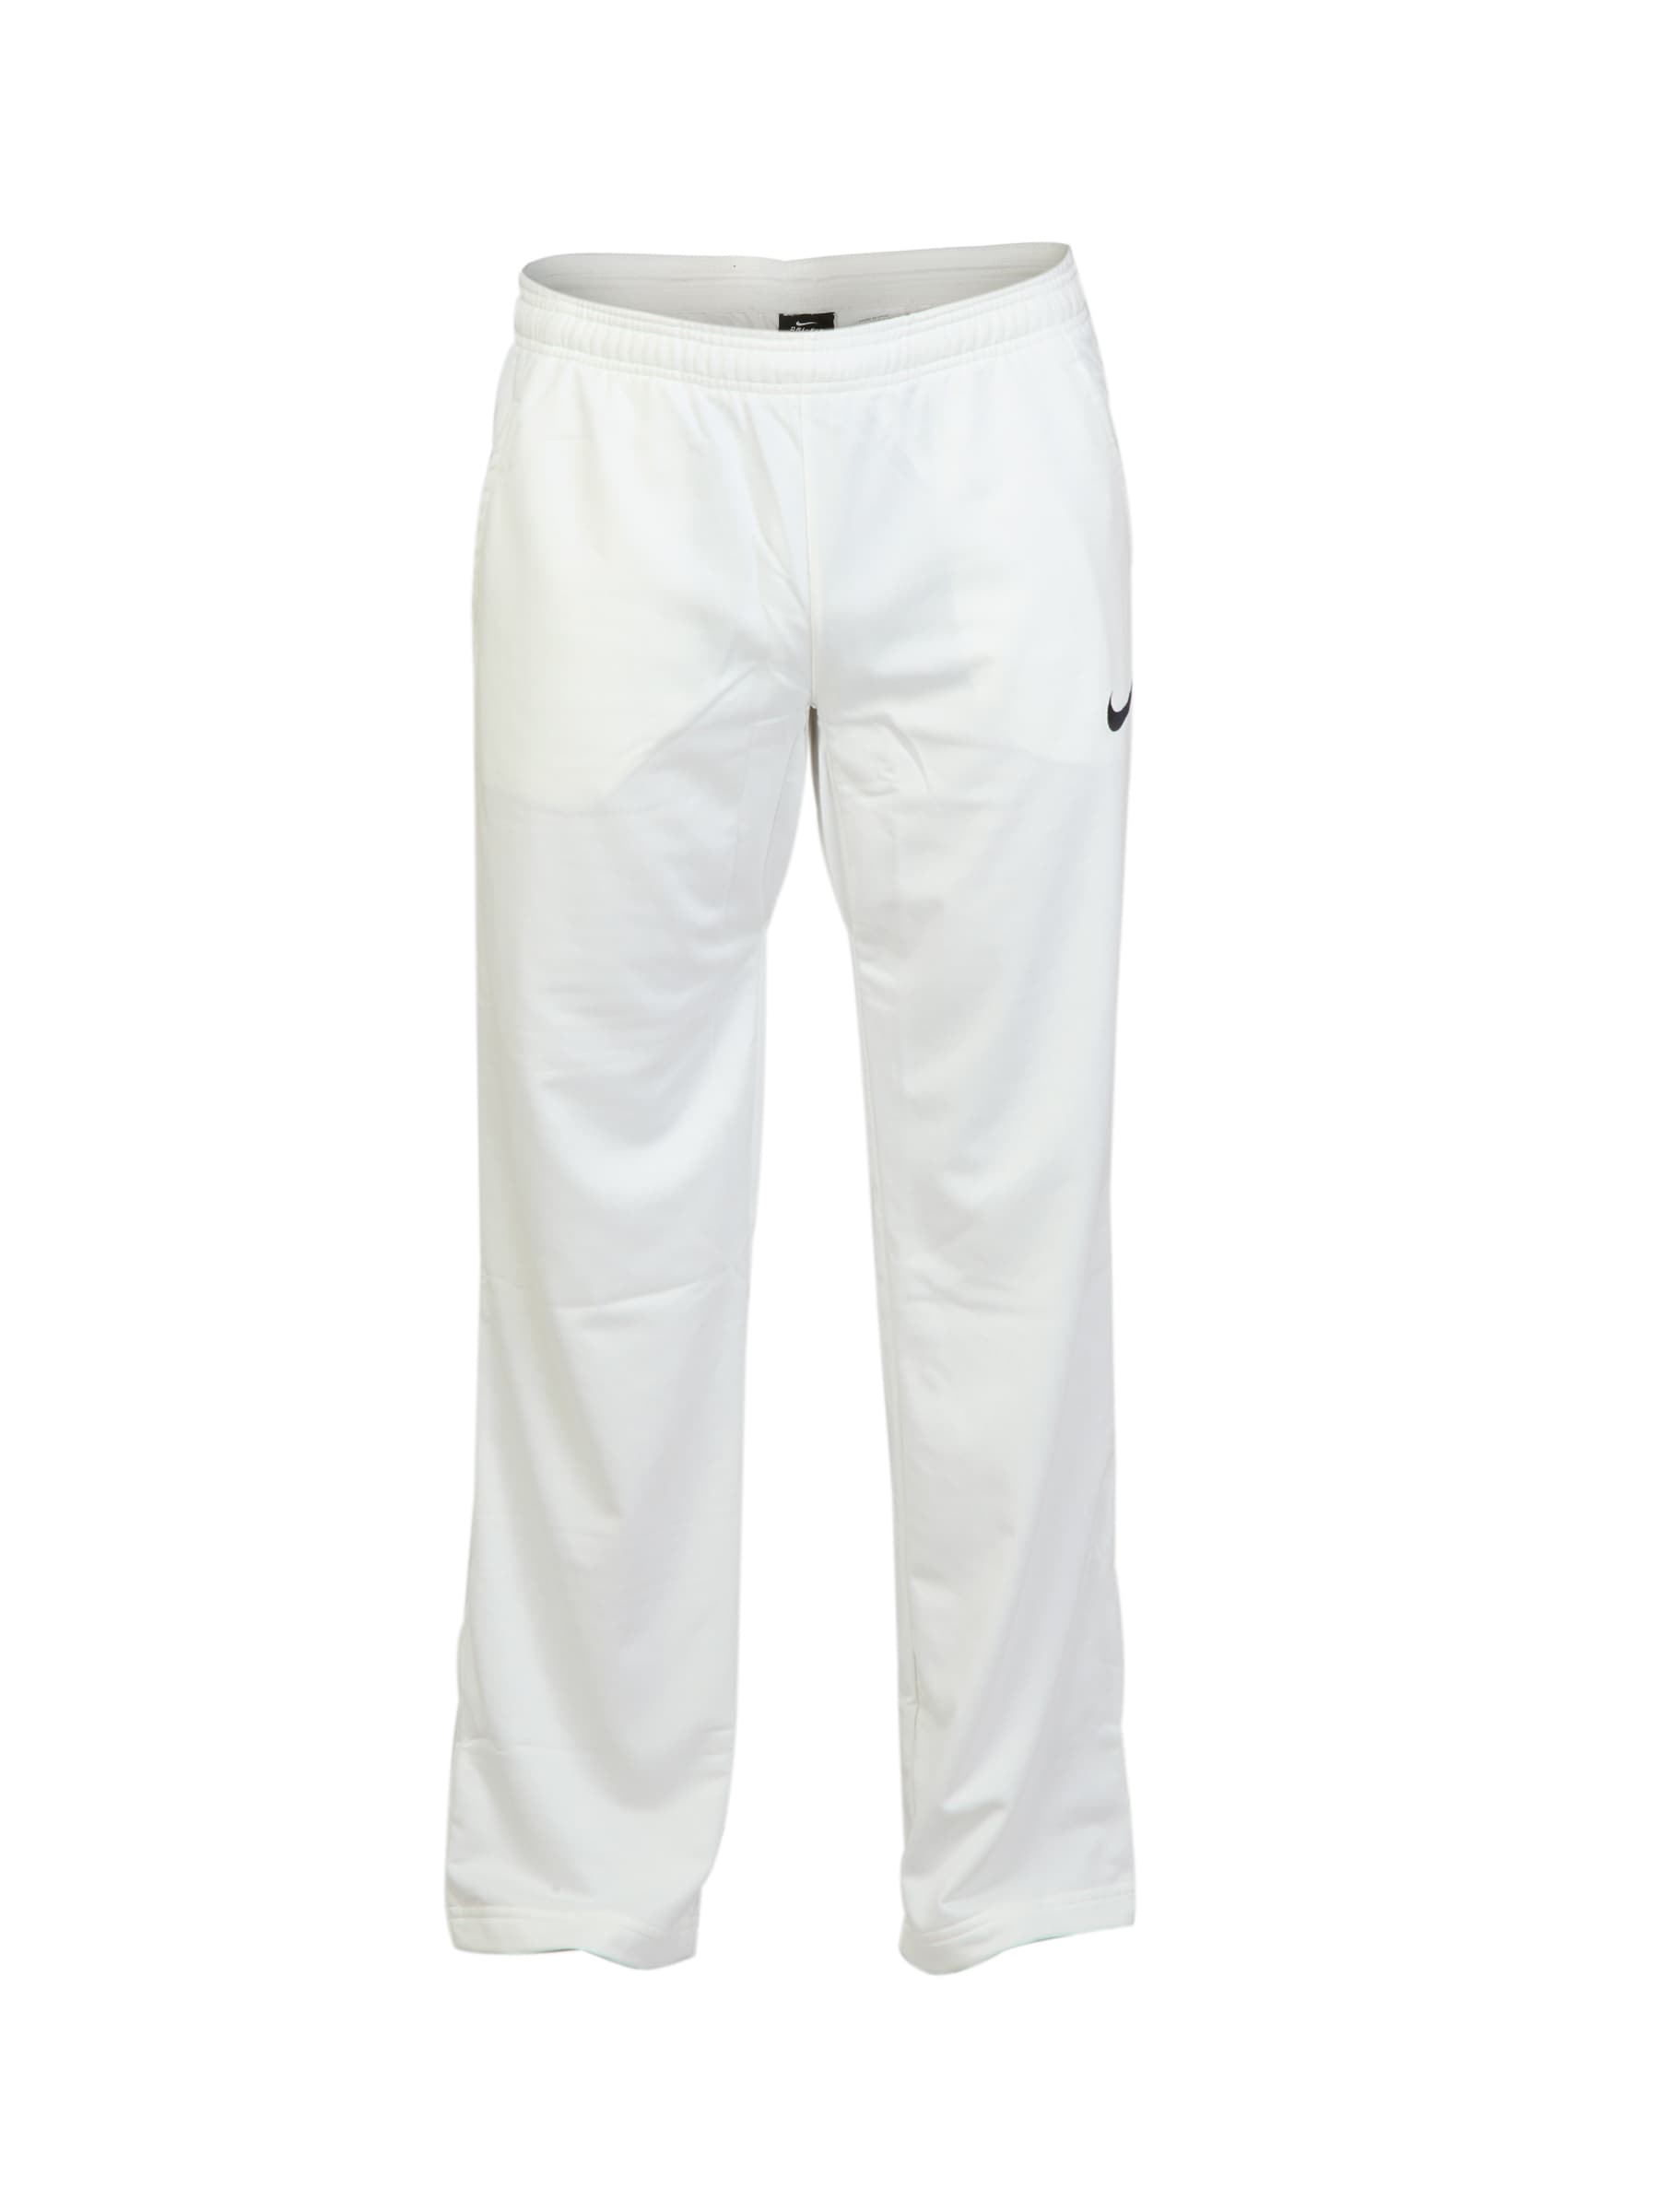 Nike Men Solid Off-White Track Pants